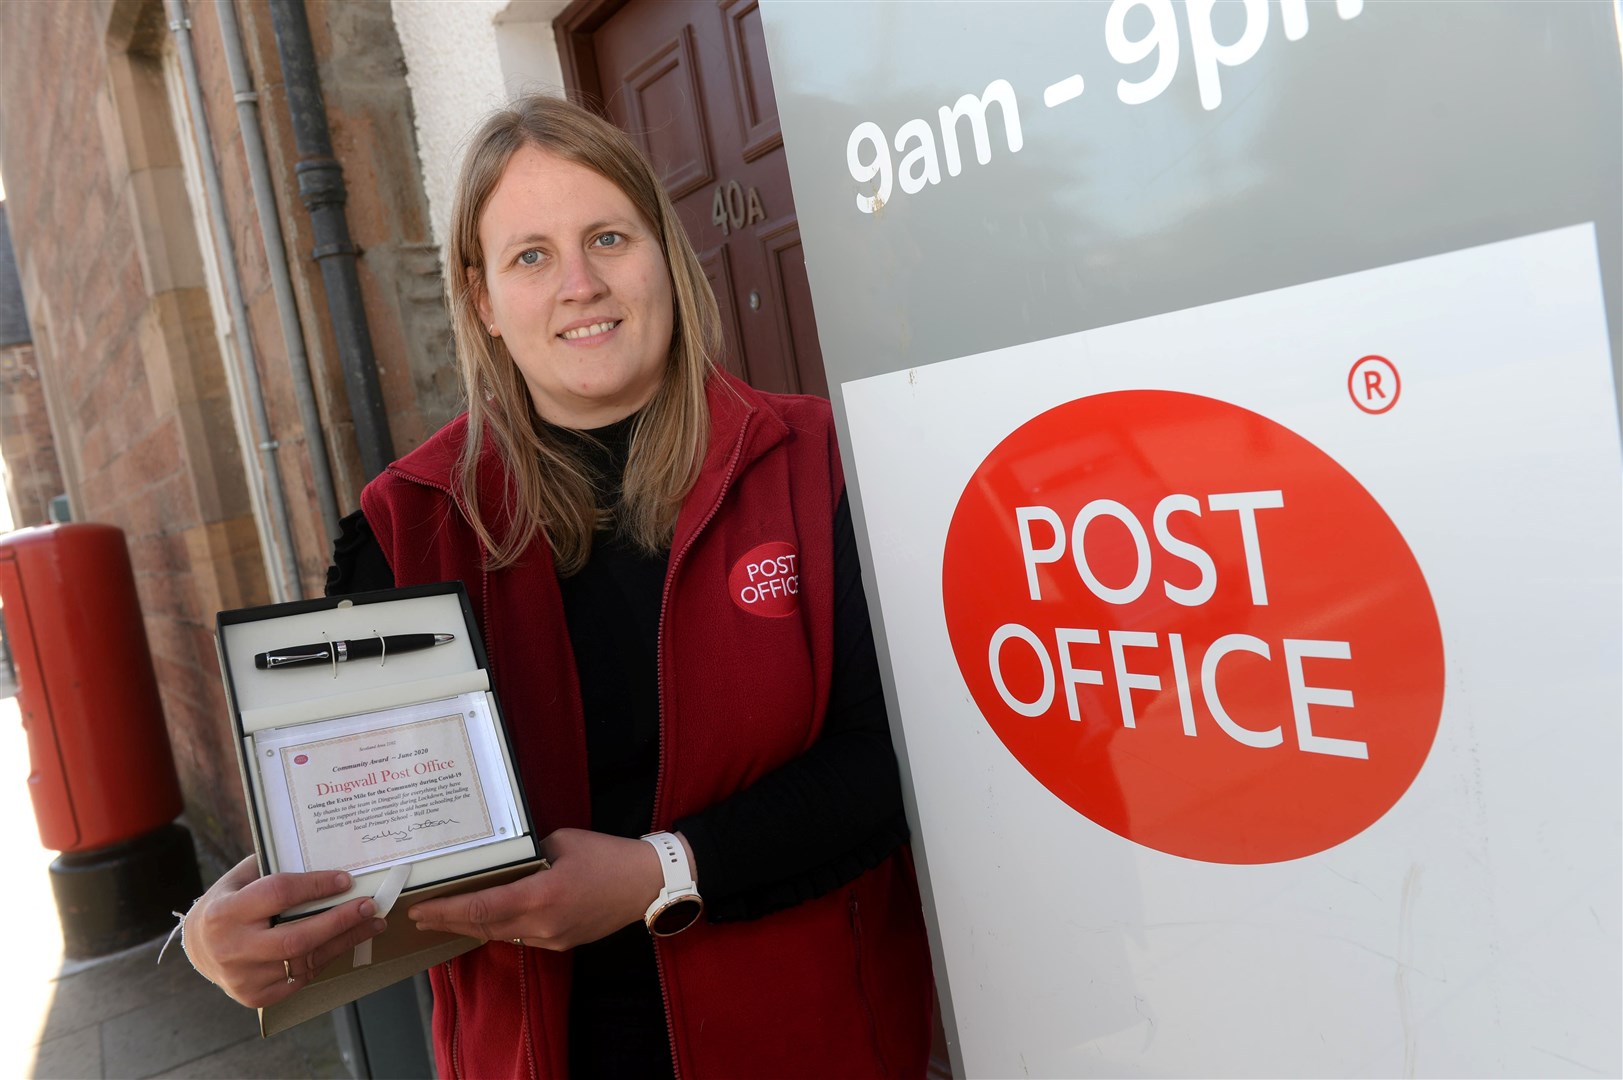 Alicen Lawrie of Dingwall Post Office has been commended for going above and beyond during the Covid-19 crisis. Picture: Callum Mackay